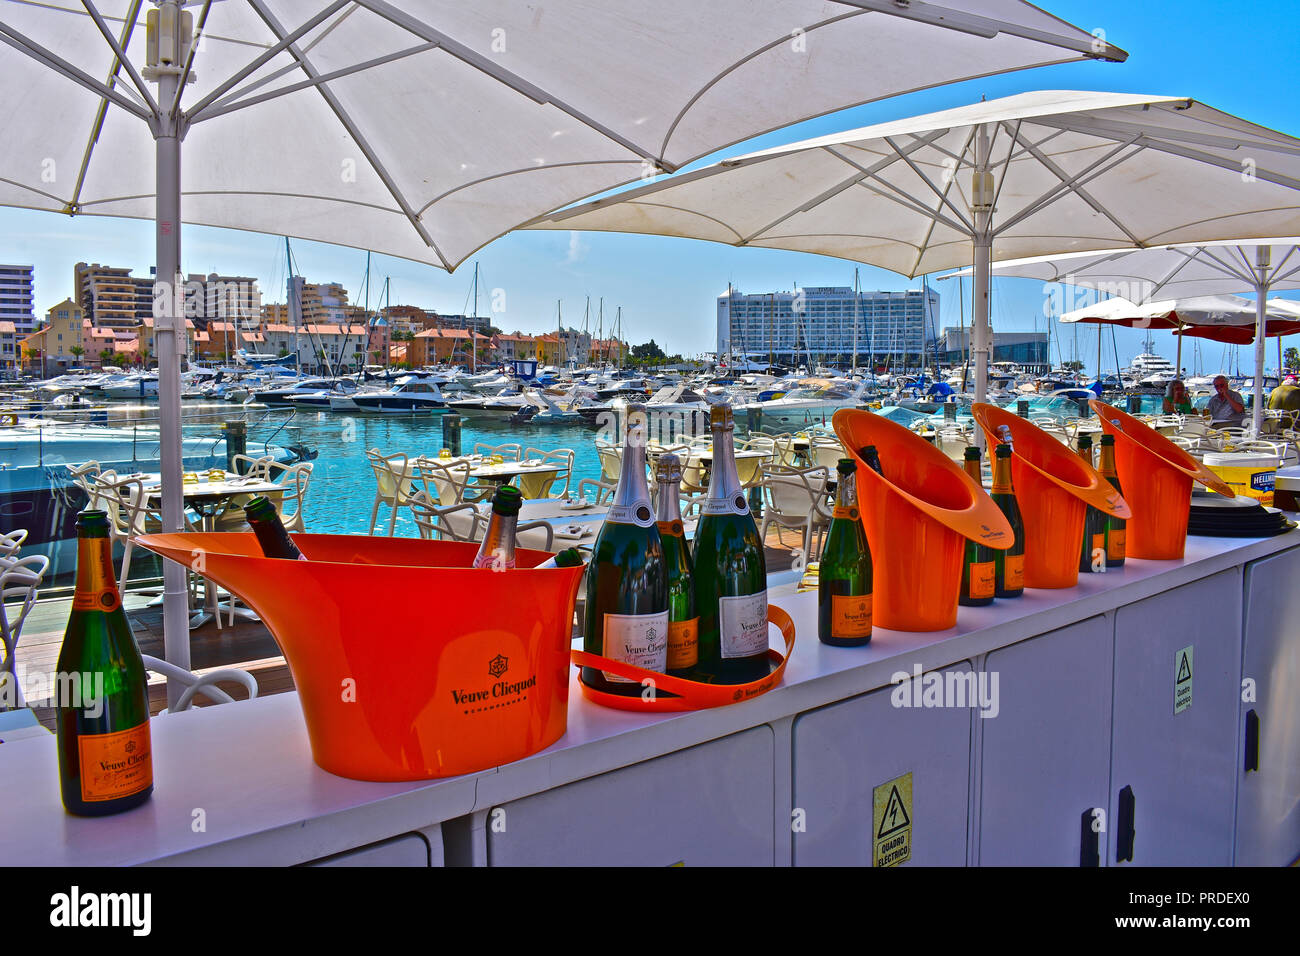 Verve Clicquot champagne bottles lined up along the entrance to an up-market waterside restaurant at Vilamoura Marina Algarve, Portugal Stock Photo